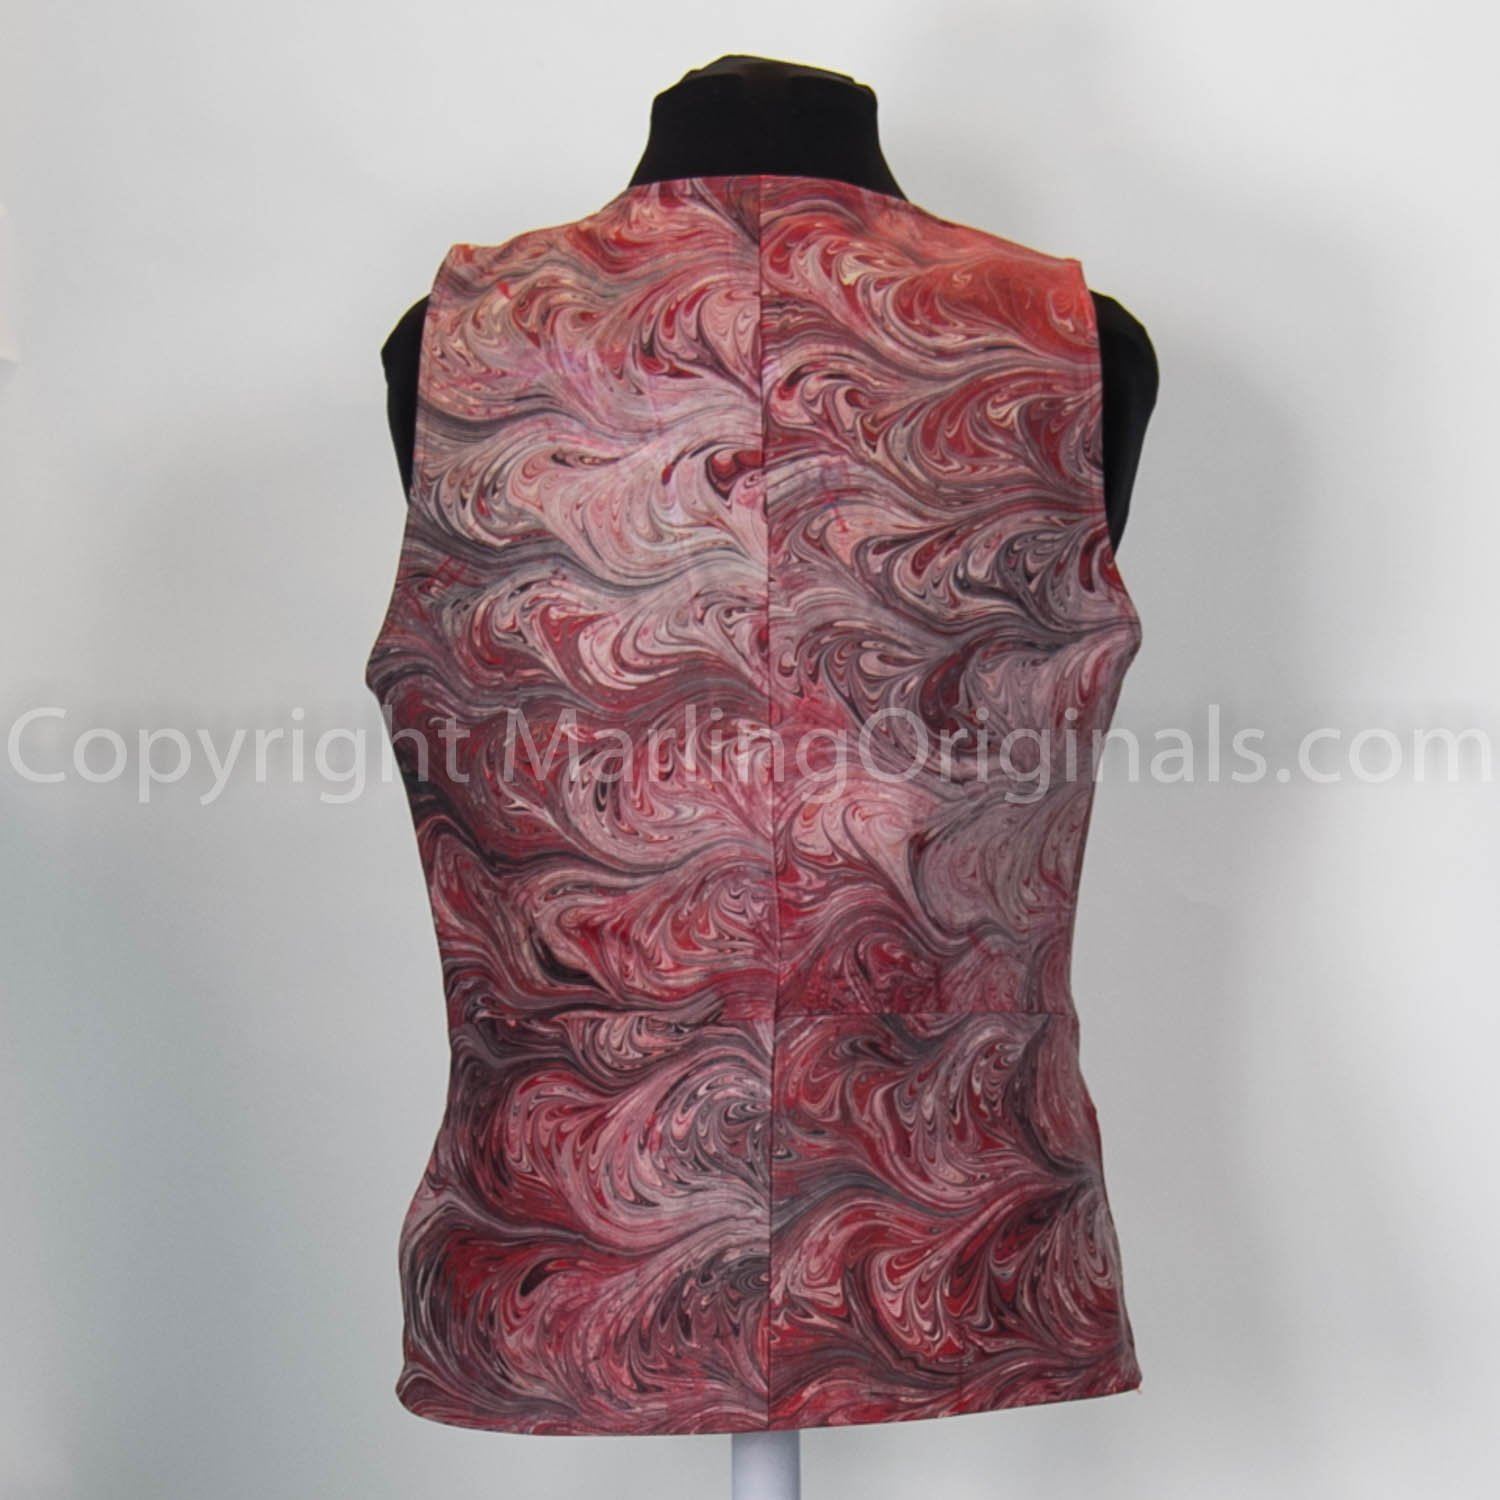 back of marbled leather vest in red, black, white